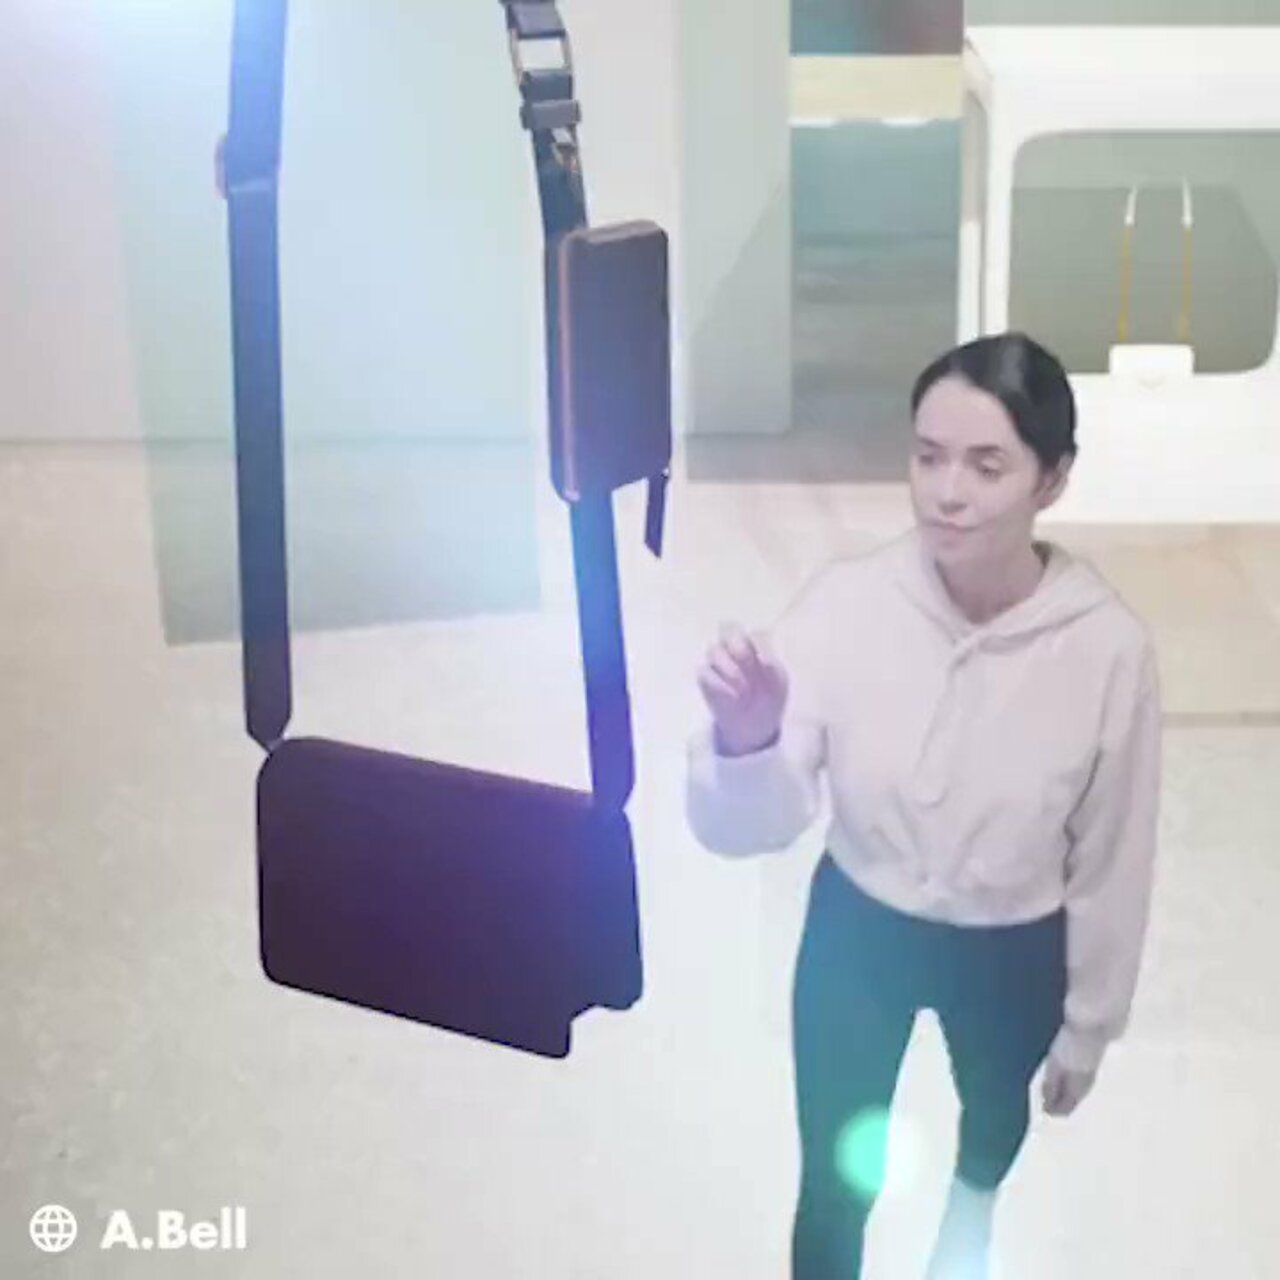 This #3D showroom makes you the designer of your own bag by @gigadgets_ #AI #ArtificialIntelligence #Innovation #Tech4Good #RetailTech cc: @maxjcm @ronald_vanloon @pascal_bornet @marcusborba https://t.co/KtvDilwAri